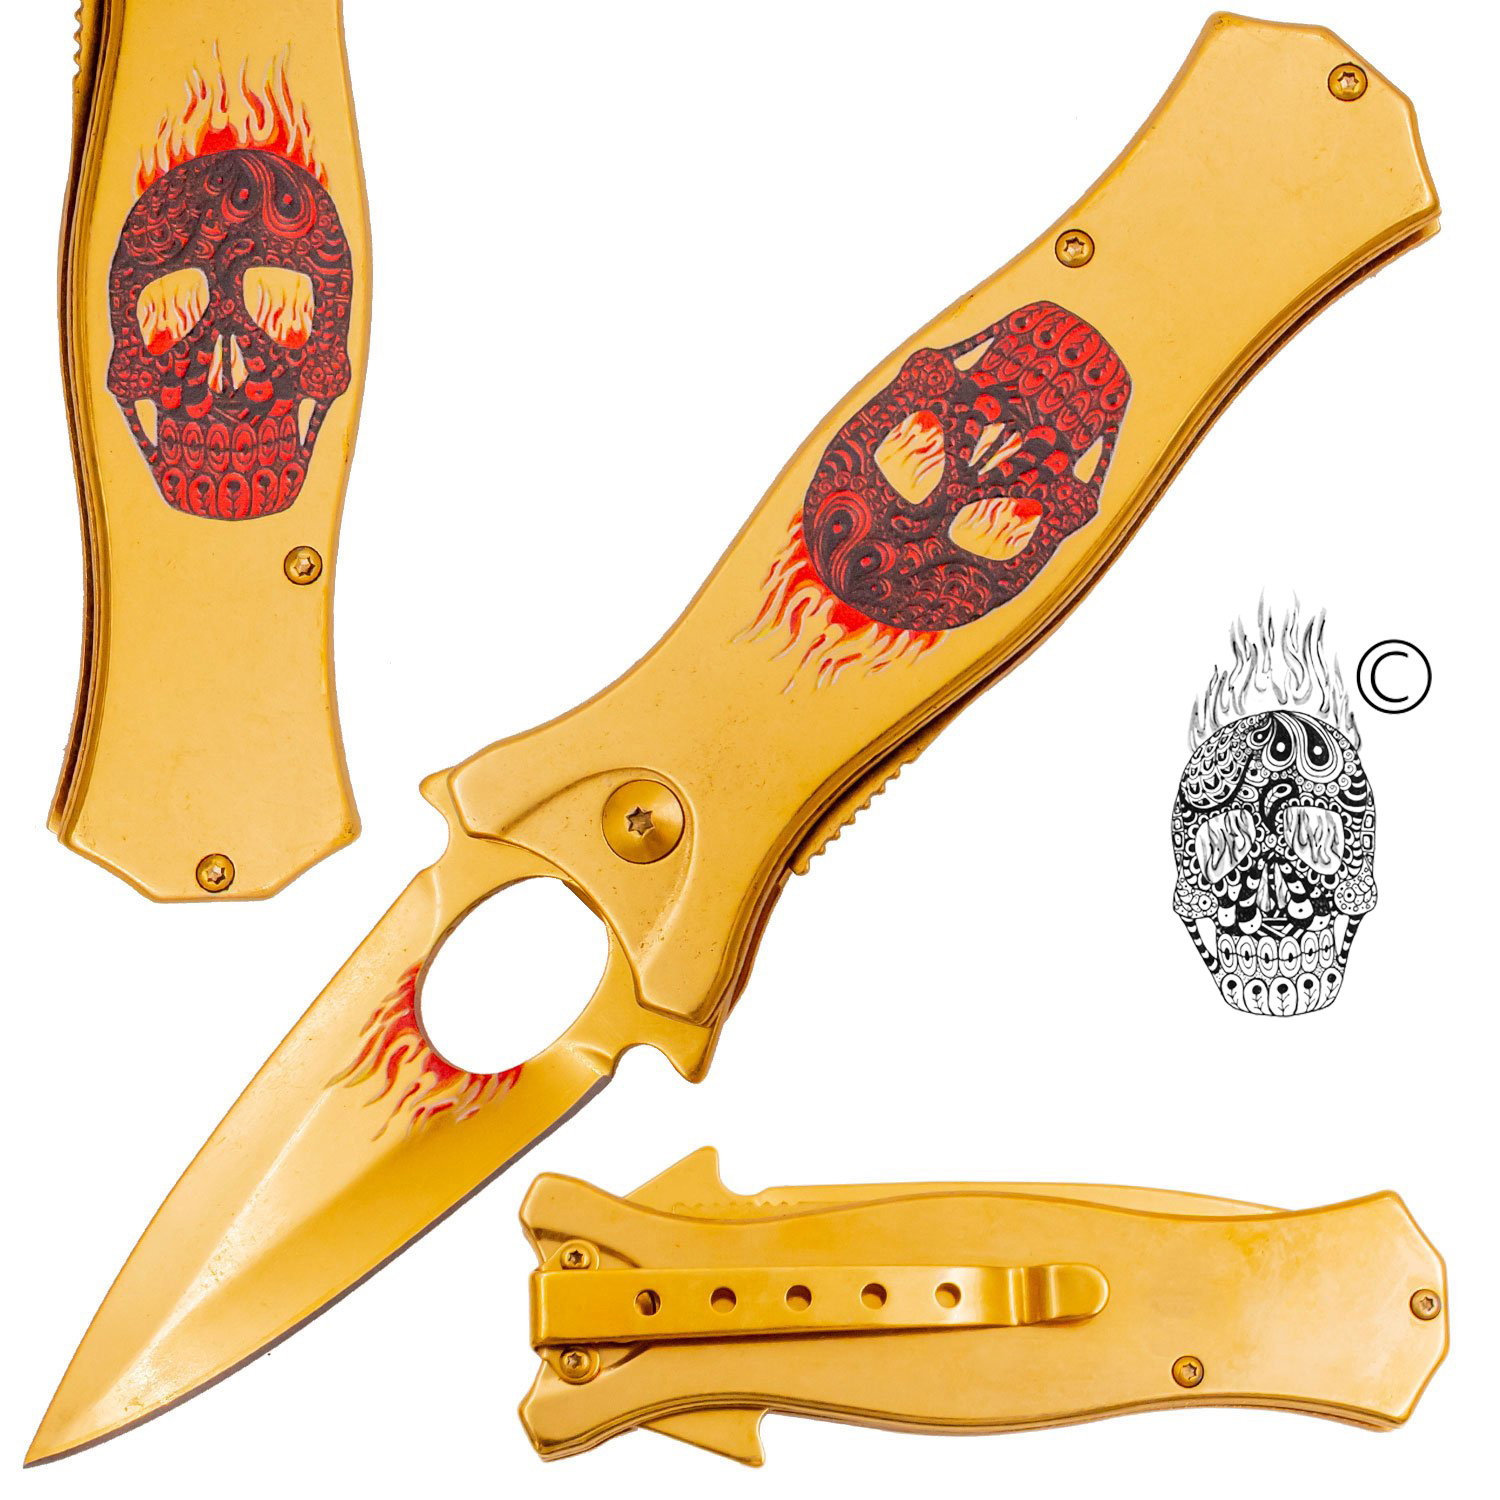 7.5 Inch Golden Ticket Spring Assisted Knife Flaming Sugar Skull (Red and Black)